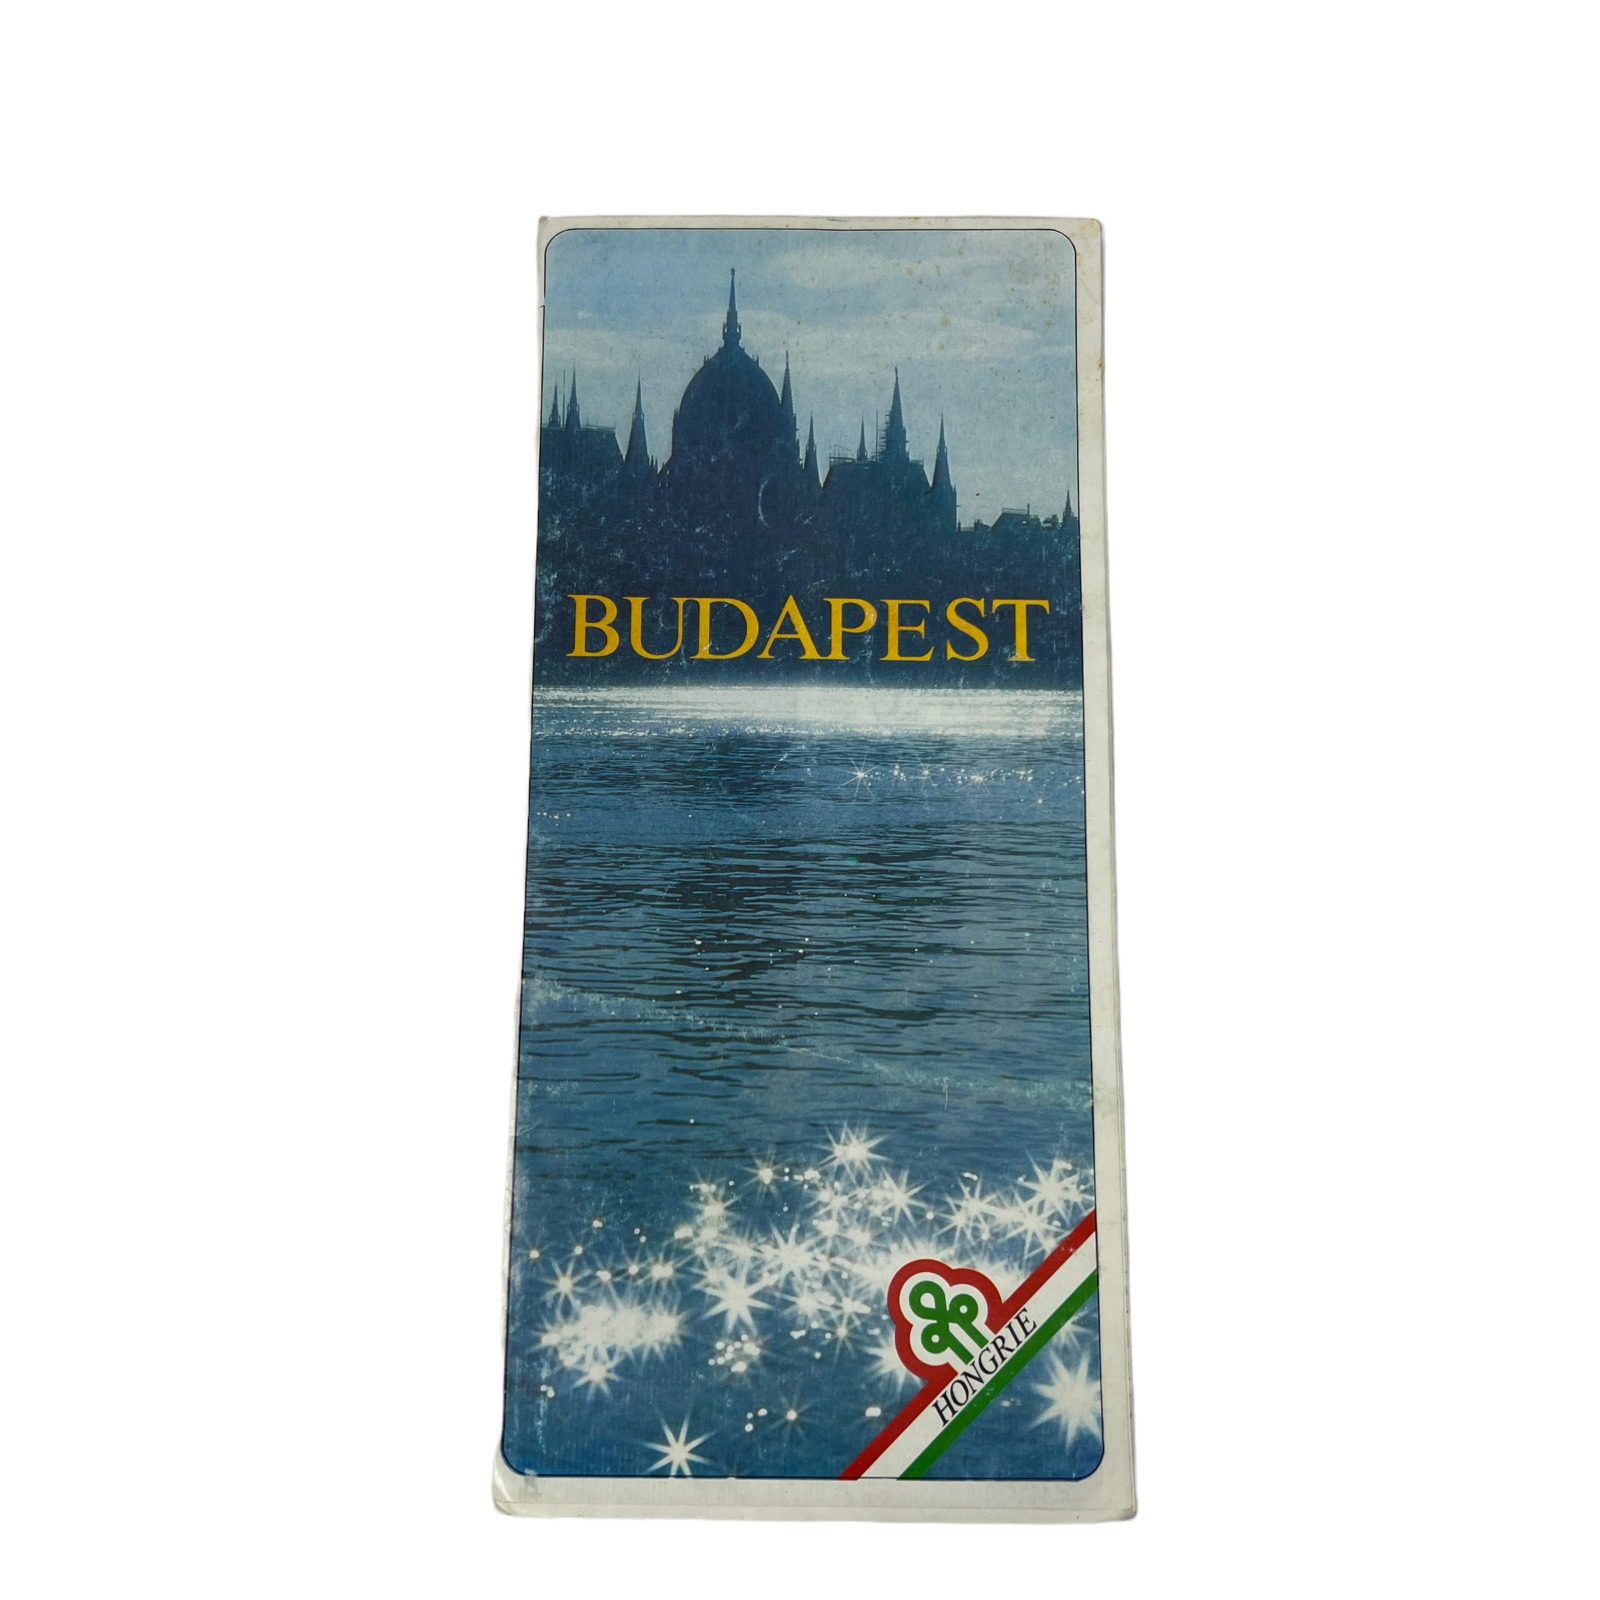 Budapest Hungary Booklet Travel Information Vintage 1968 Printed in French